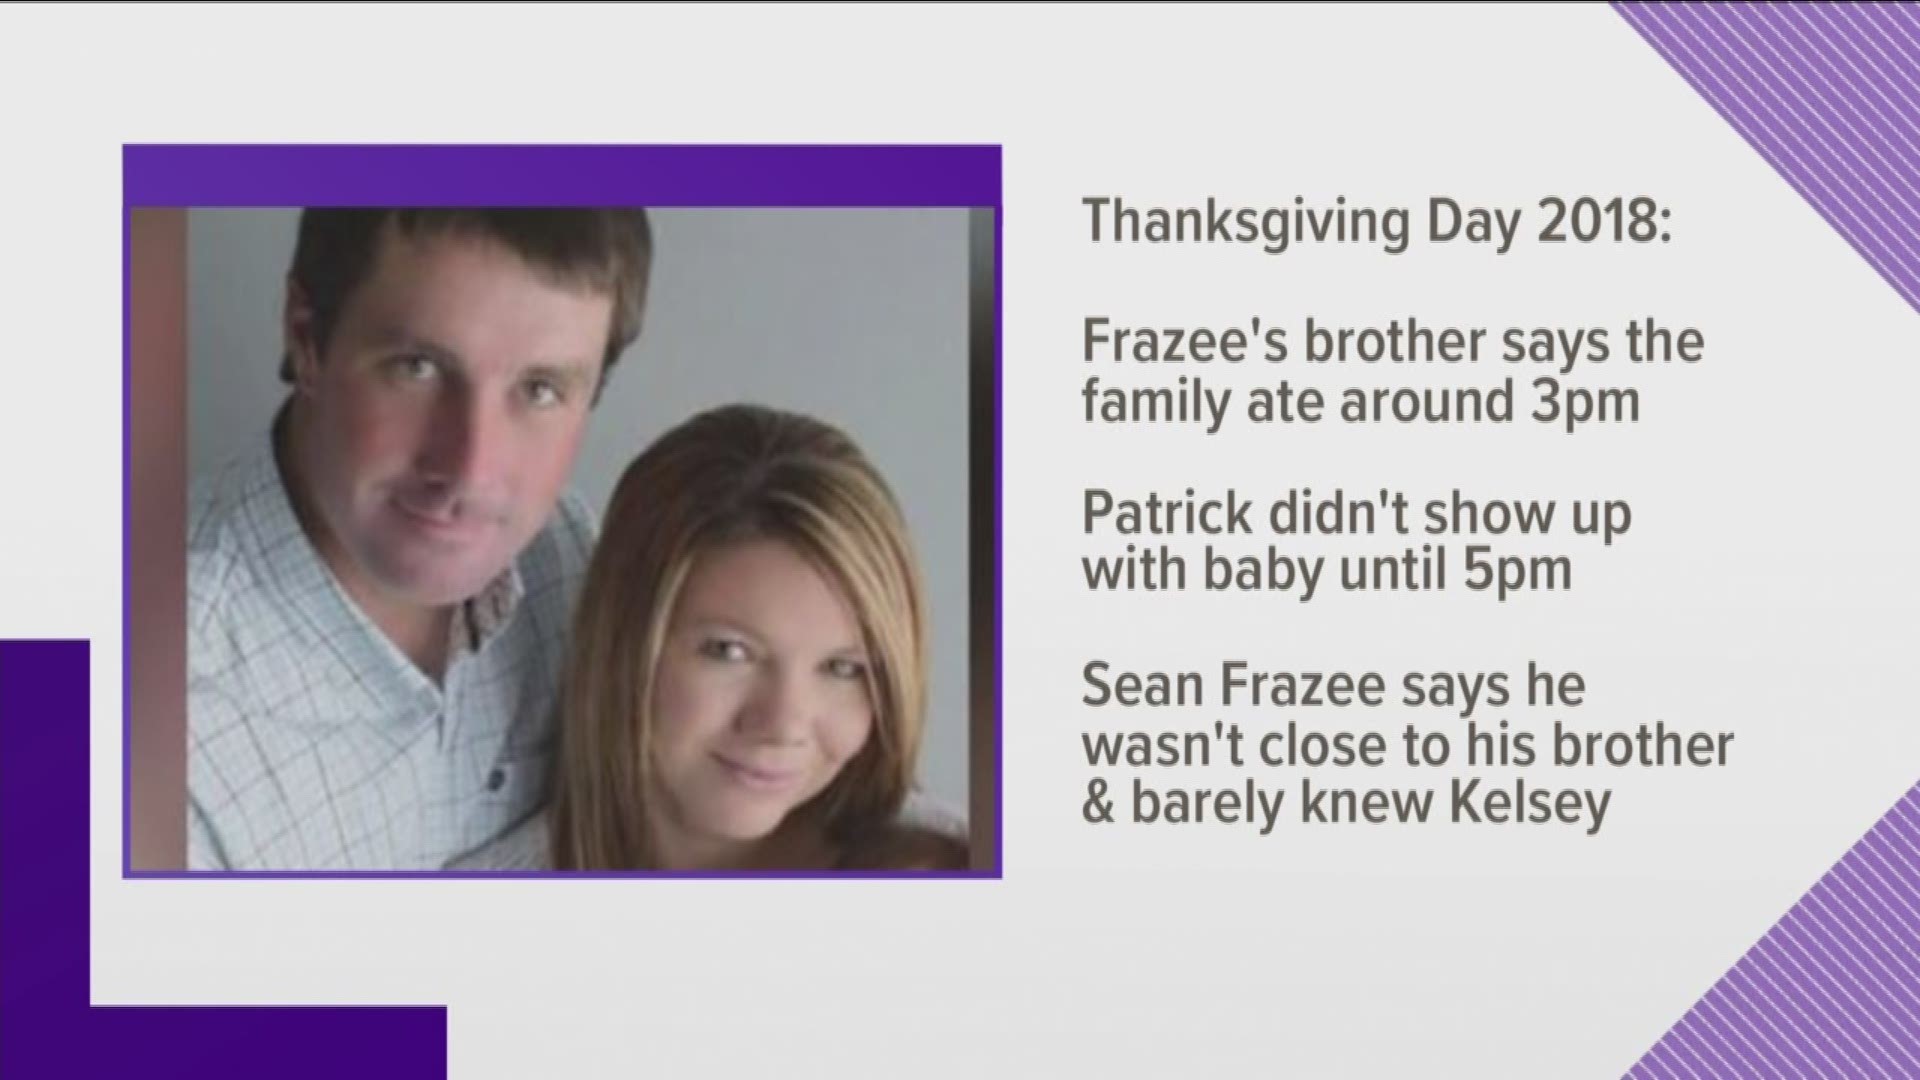 The brother's testimony was used to help create a timeline of events of the day his brother is accused of killing his fiancee, Kelsey.